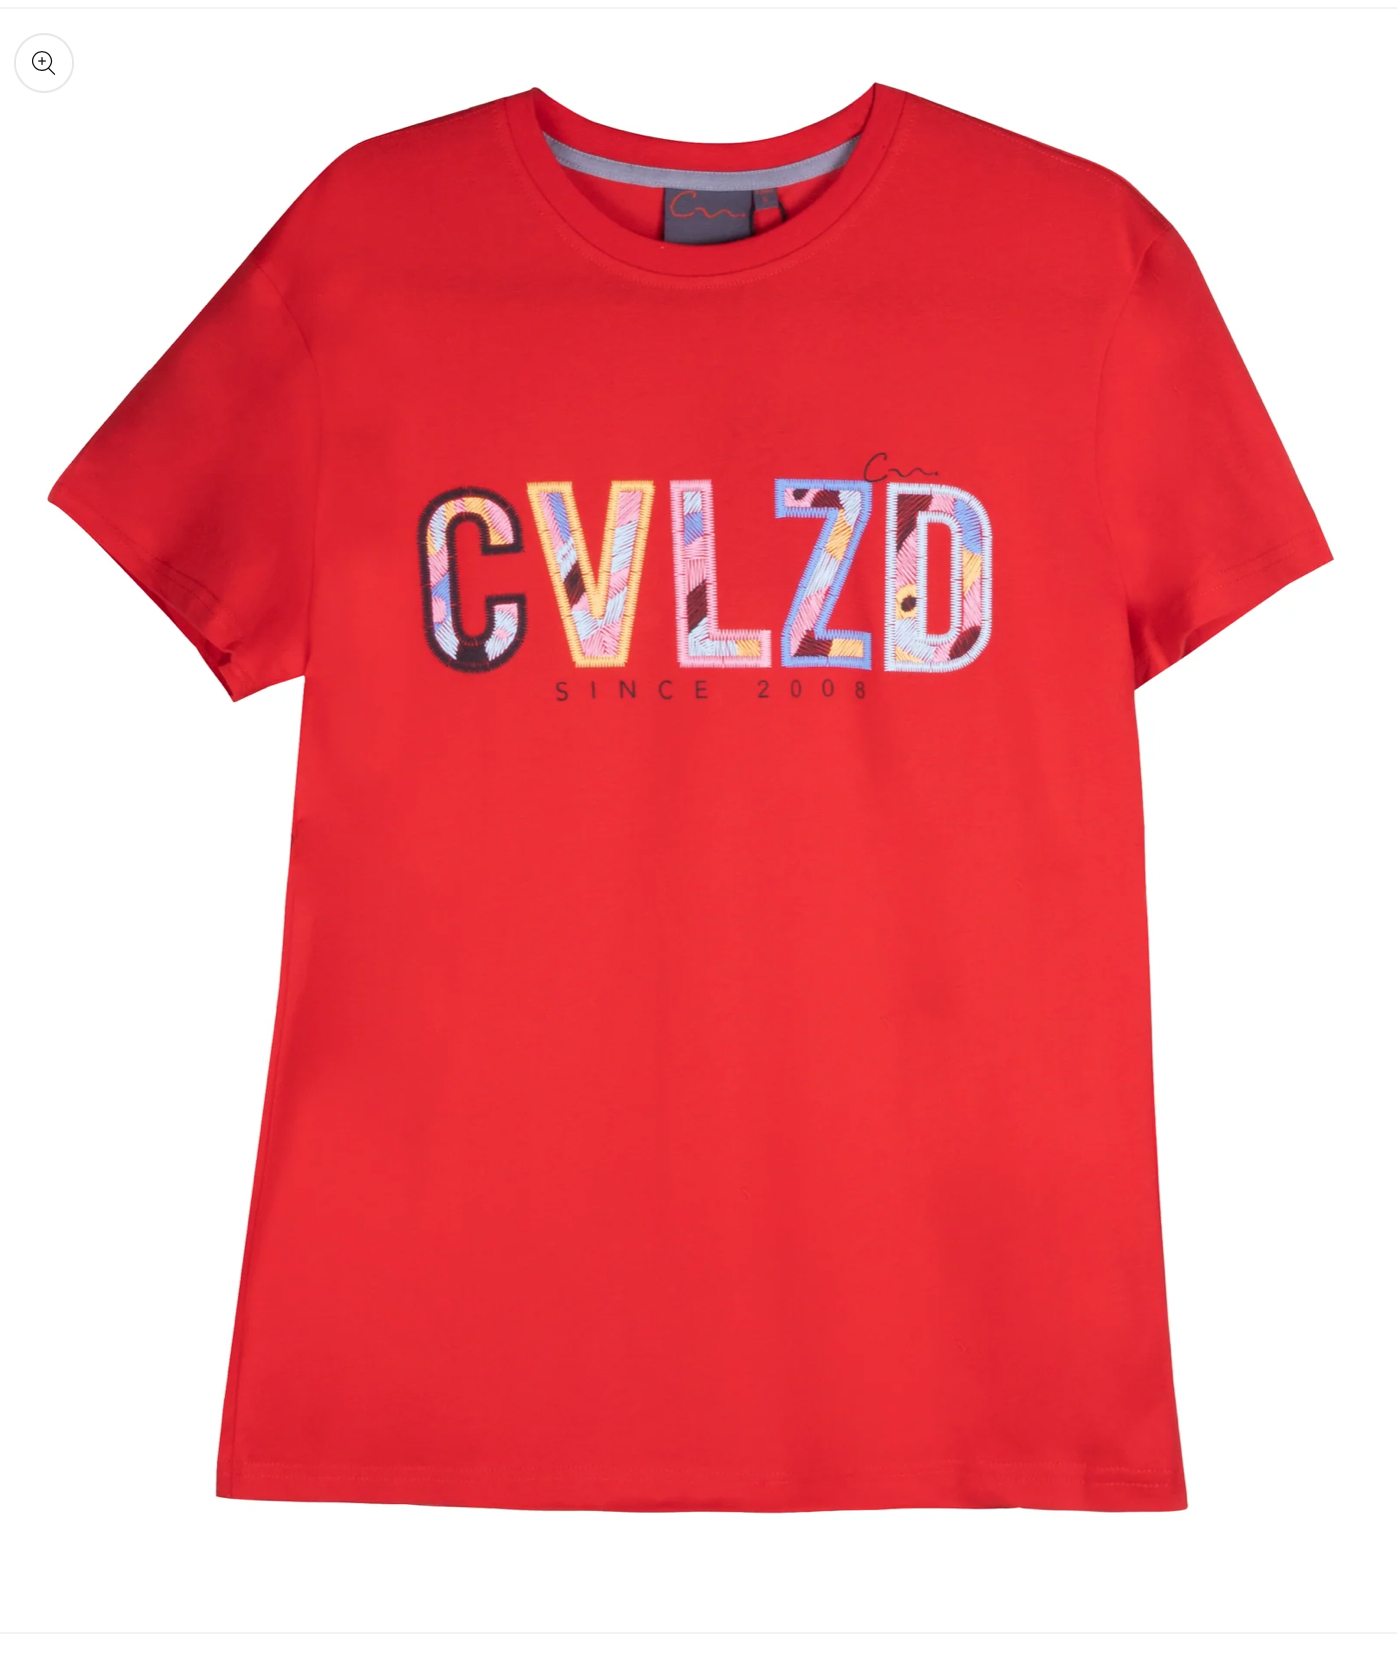 CVLZD Cola Red Tee